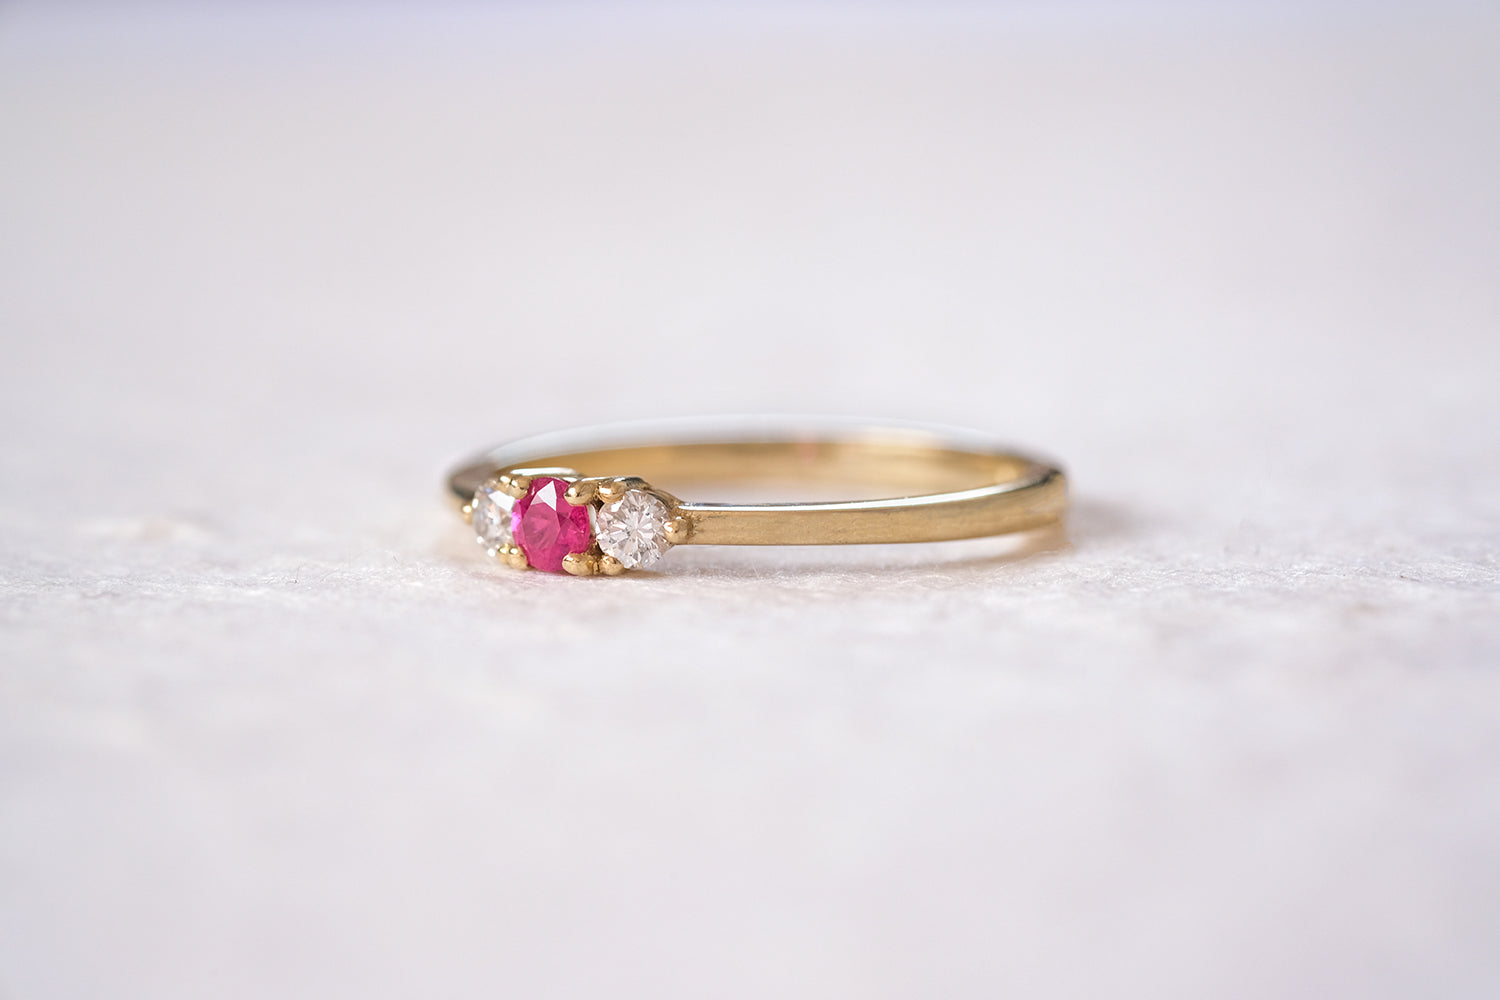 Engagement Gold Ring Set With A Ruby And Two Diamonds